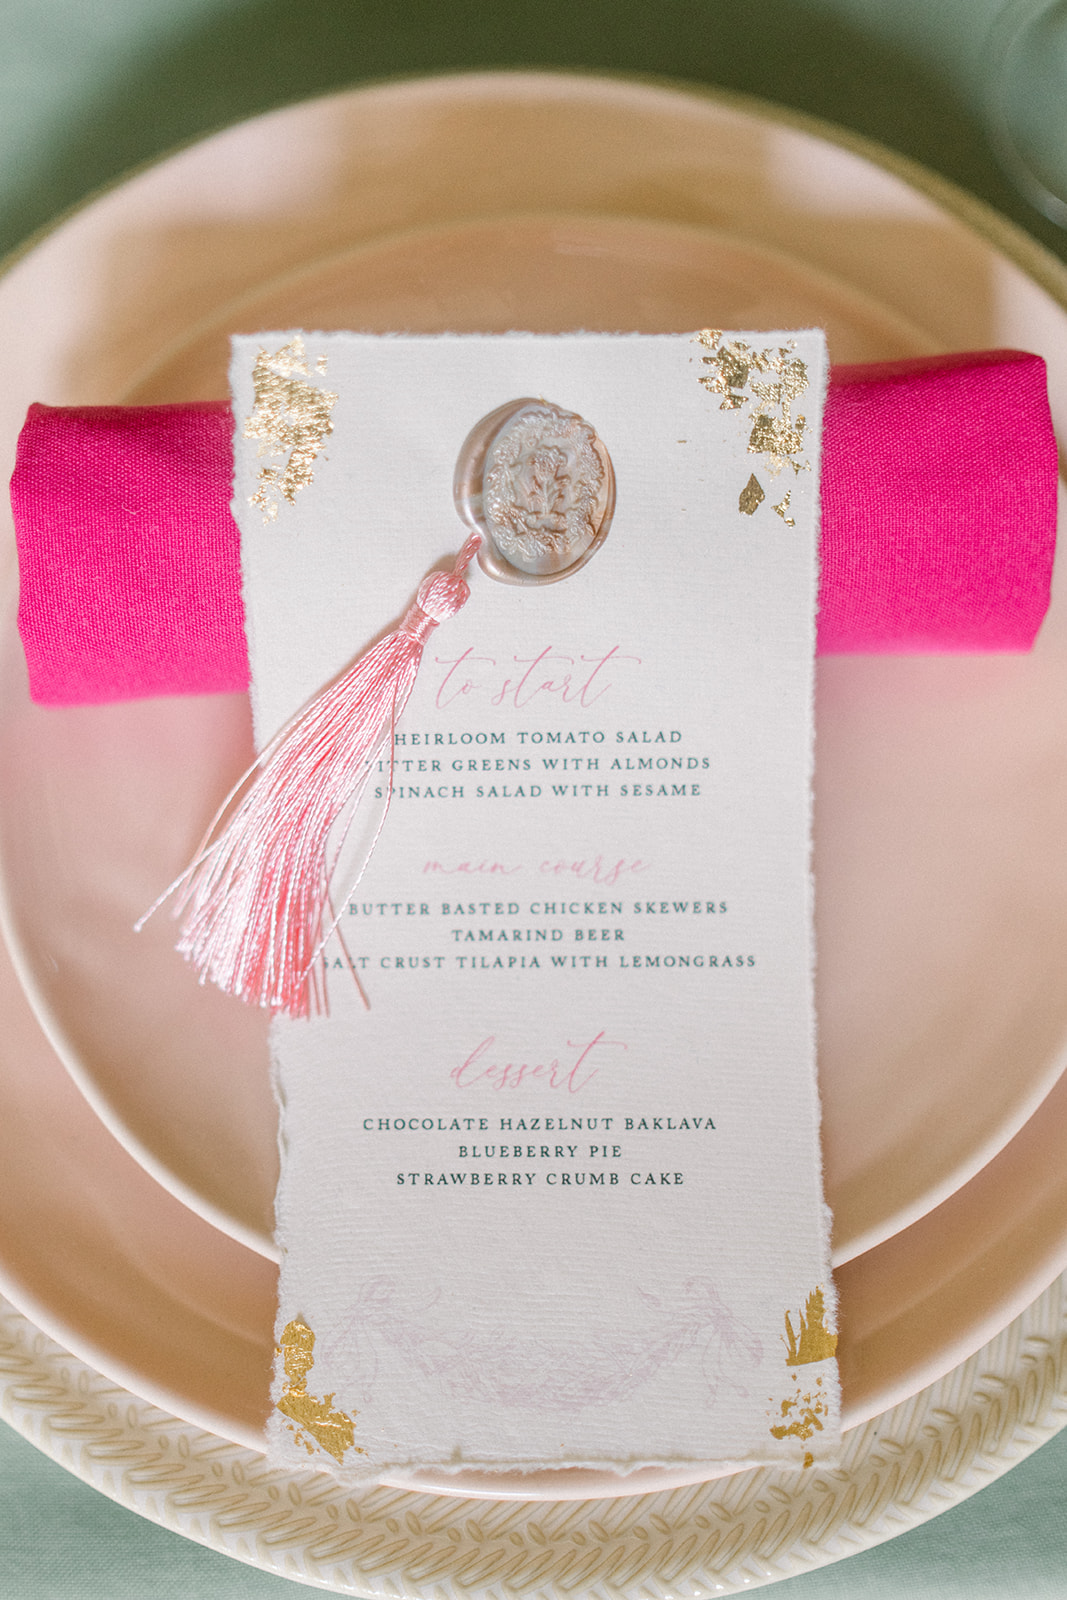 Luxury wedding table setting featuring a pastel pink charger plate, gold cutlery, and an elegant invitation